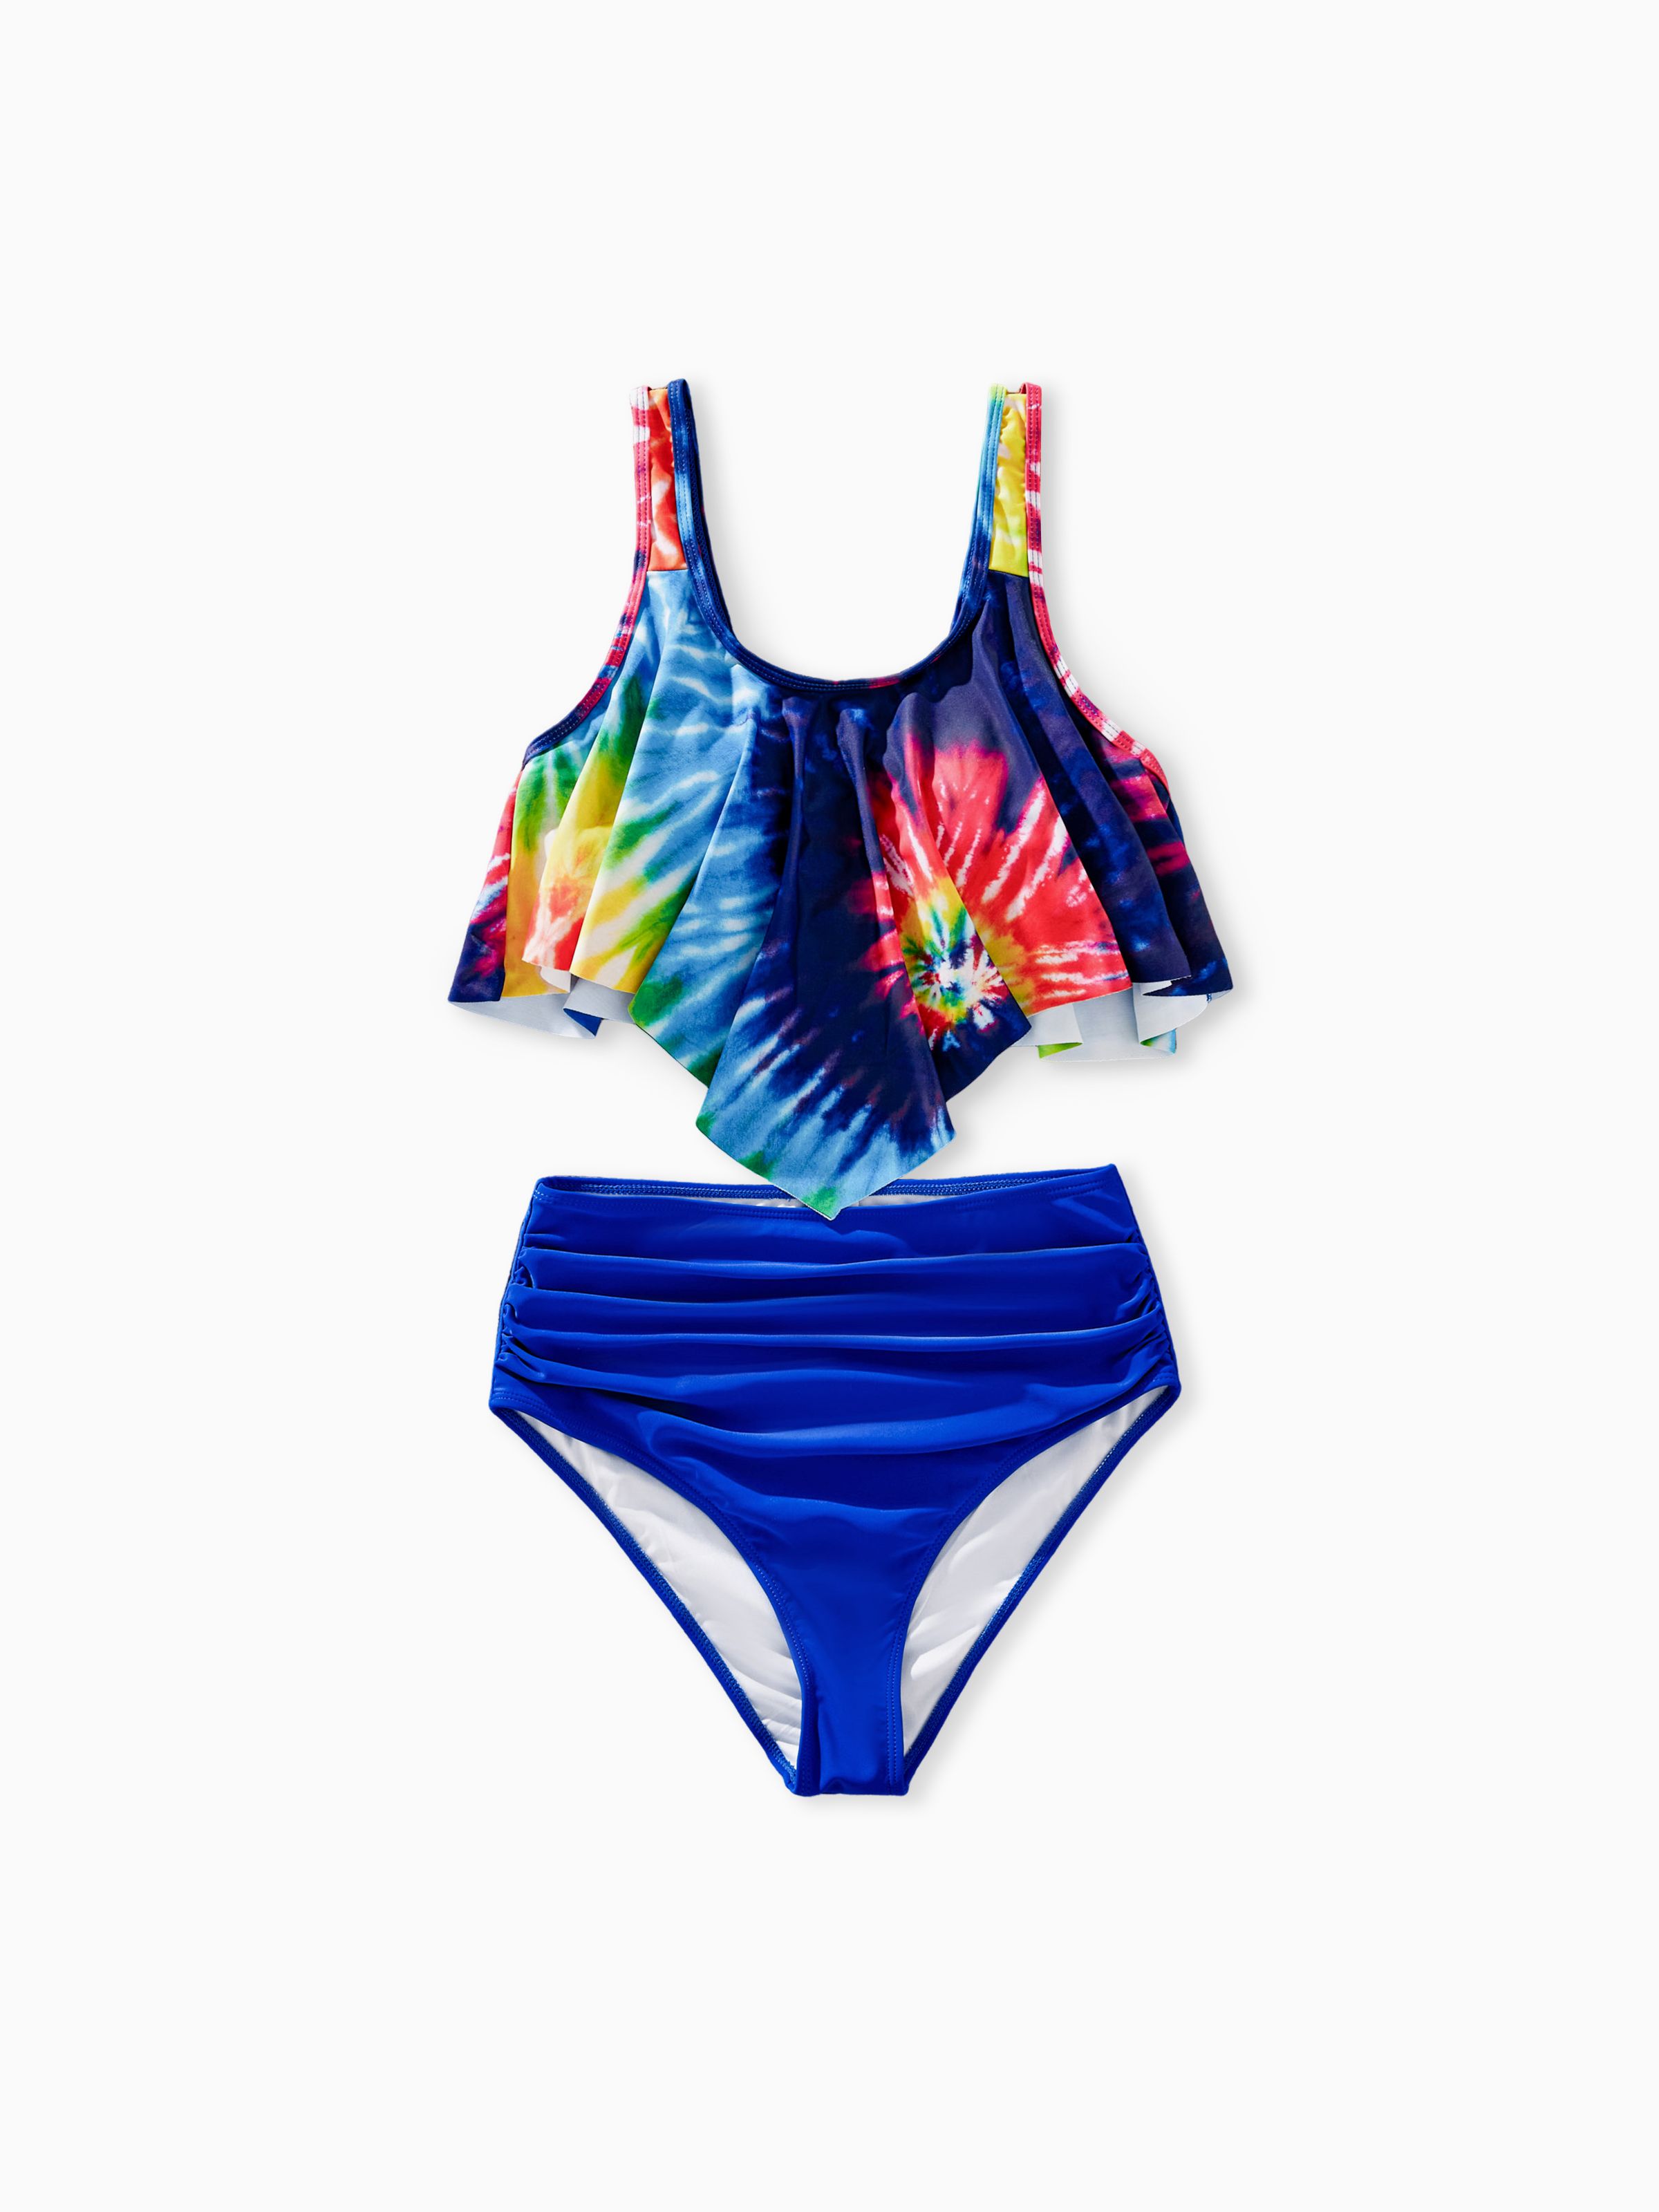 

Casual Tie-Dyed Family Swimwear with Ruffle Edge, Medium Thickness, Opaque, Regular Fit - Polyester and Spandex Blend.